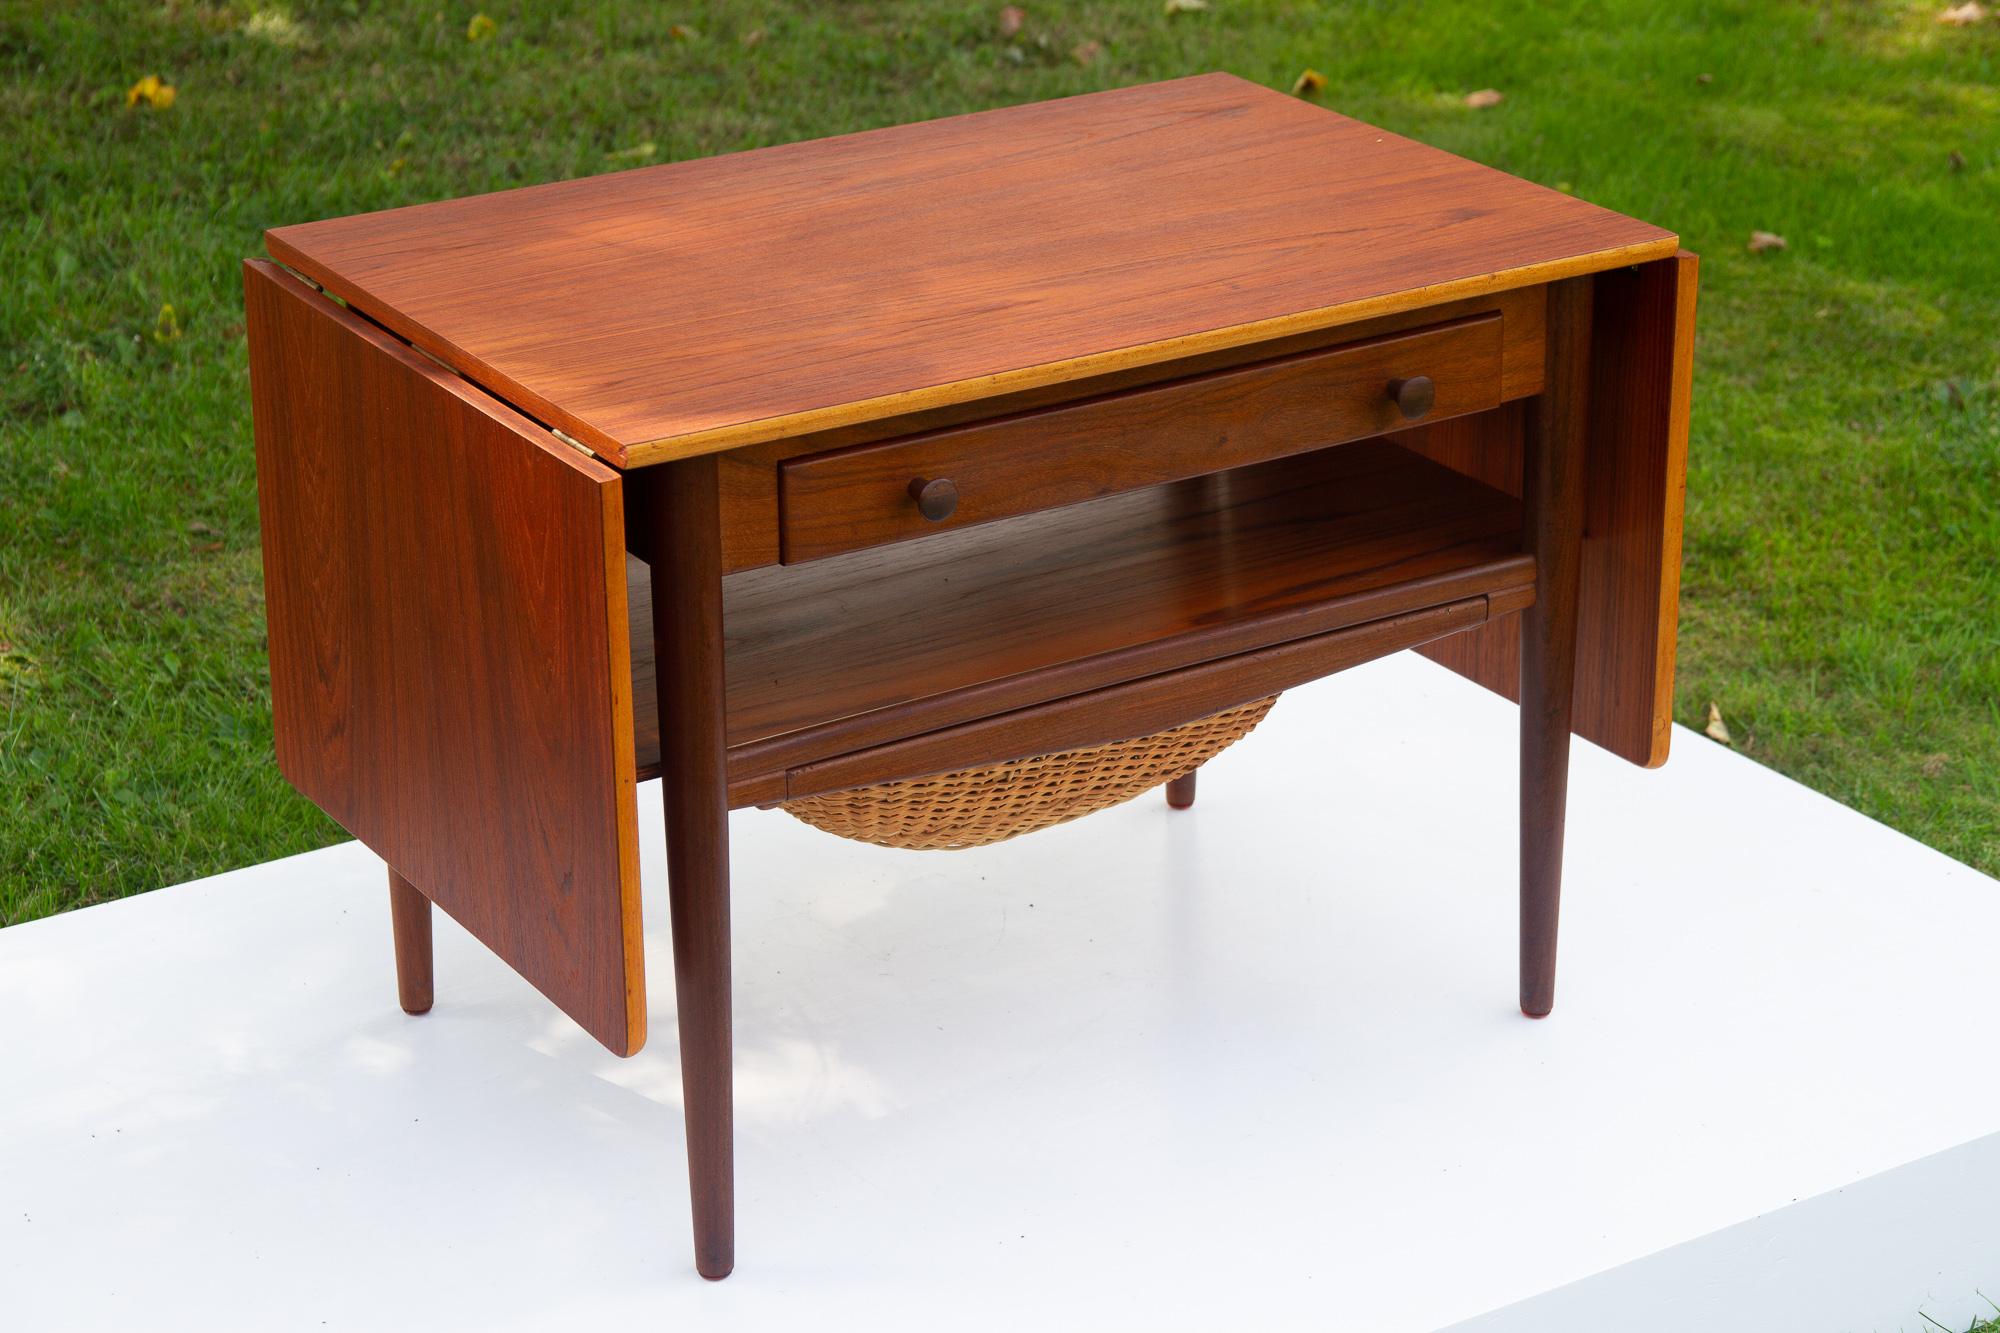 Vintage Danish teak sewing table, 1960s.
Elegant and classic Danish modern expanding sewing table with drawer and basket. This table features two drop down leaves that allows the top to expand to a length of 149.5 cm. One large drawer with several